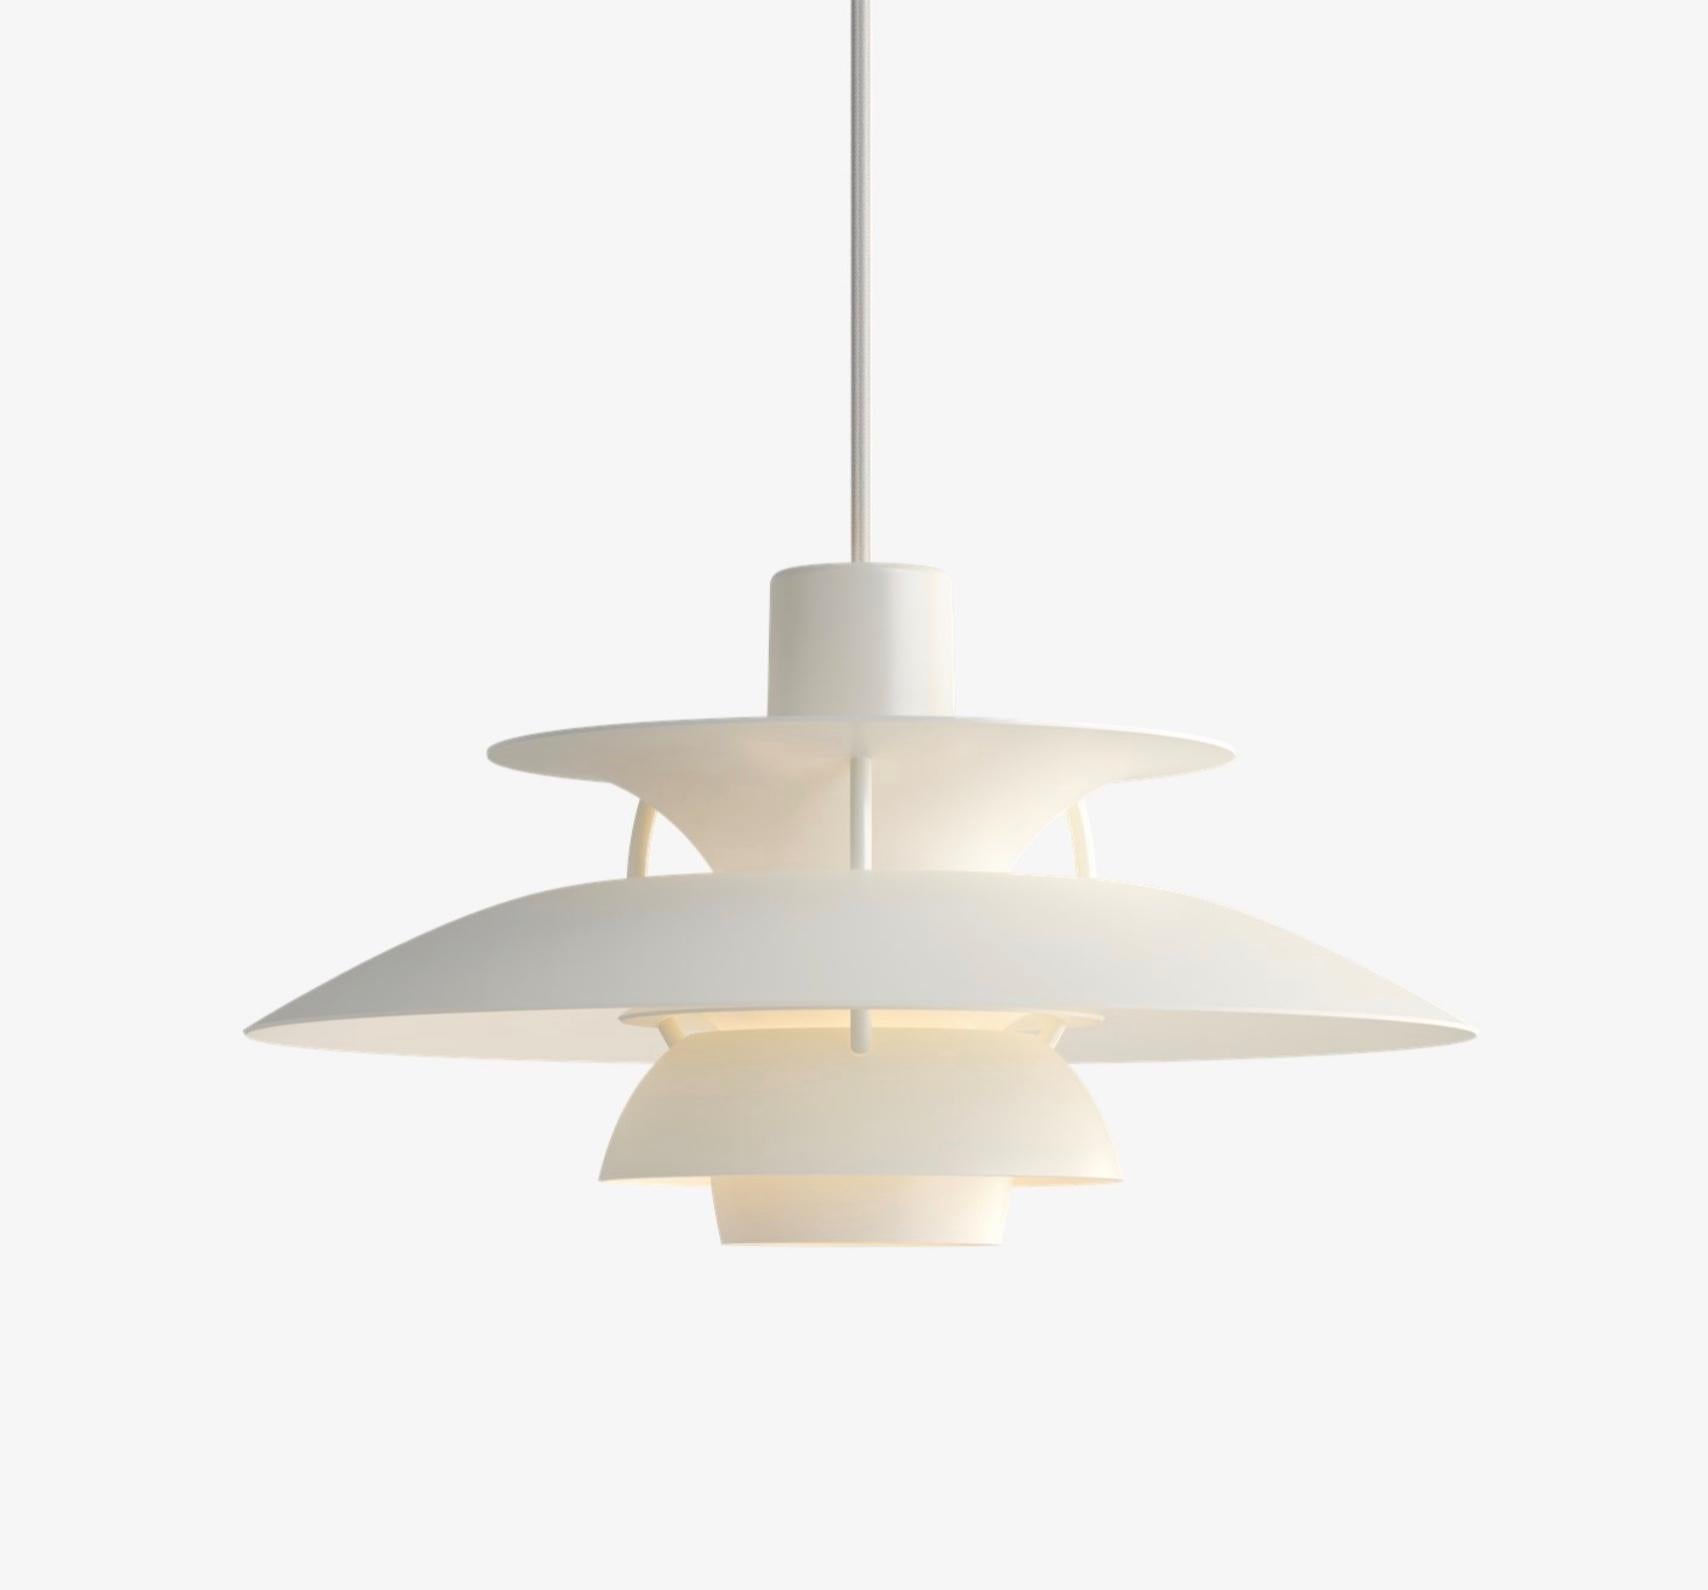 Poul Henningsen PH5 mini pendant for Louis Poulsen. Designed 1958, Mini in 2017. New, current production.

Poul Henningsen developed the PH 5 in 1958 in response to constant changes made to the shape and size of incandescent bulbs by bulb